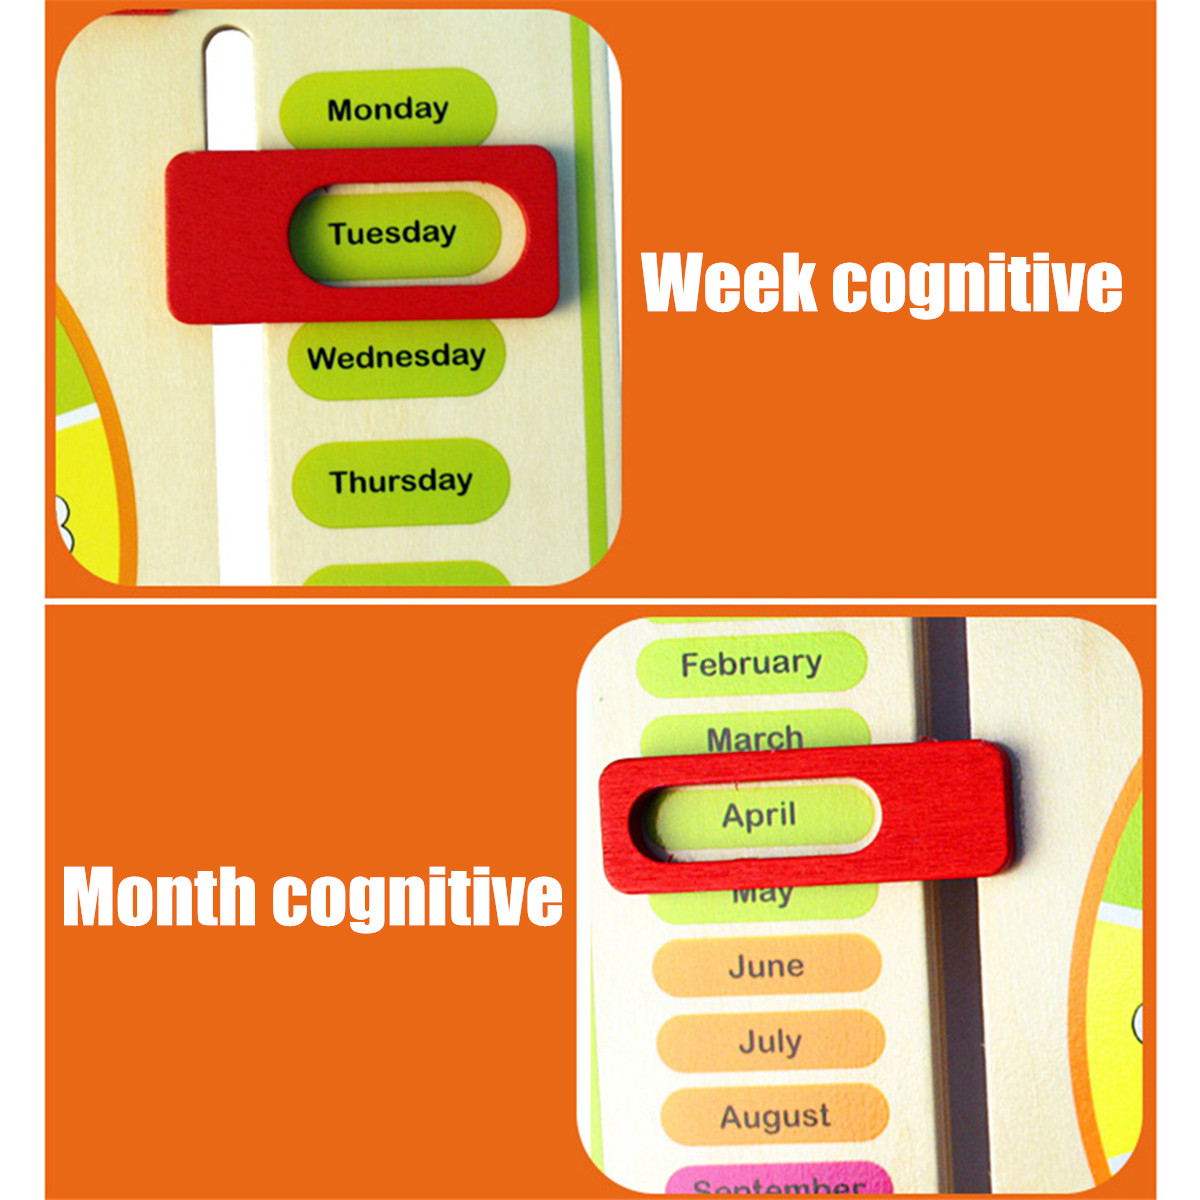 Wooden-Multifunction-Learning-Clock-Toy-Alarm-Calendar-Cognition-Educational-Toys-1550385-7